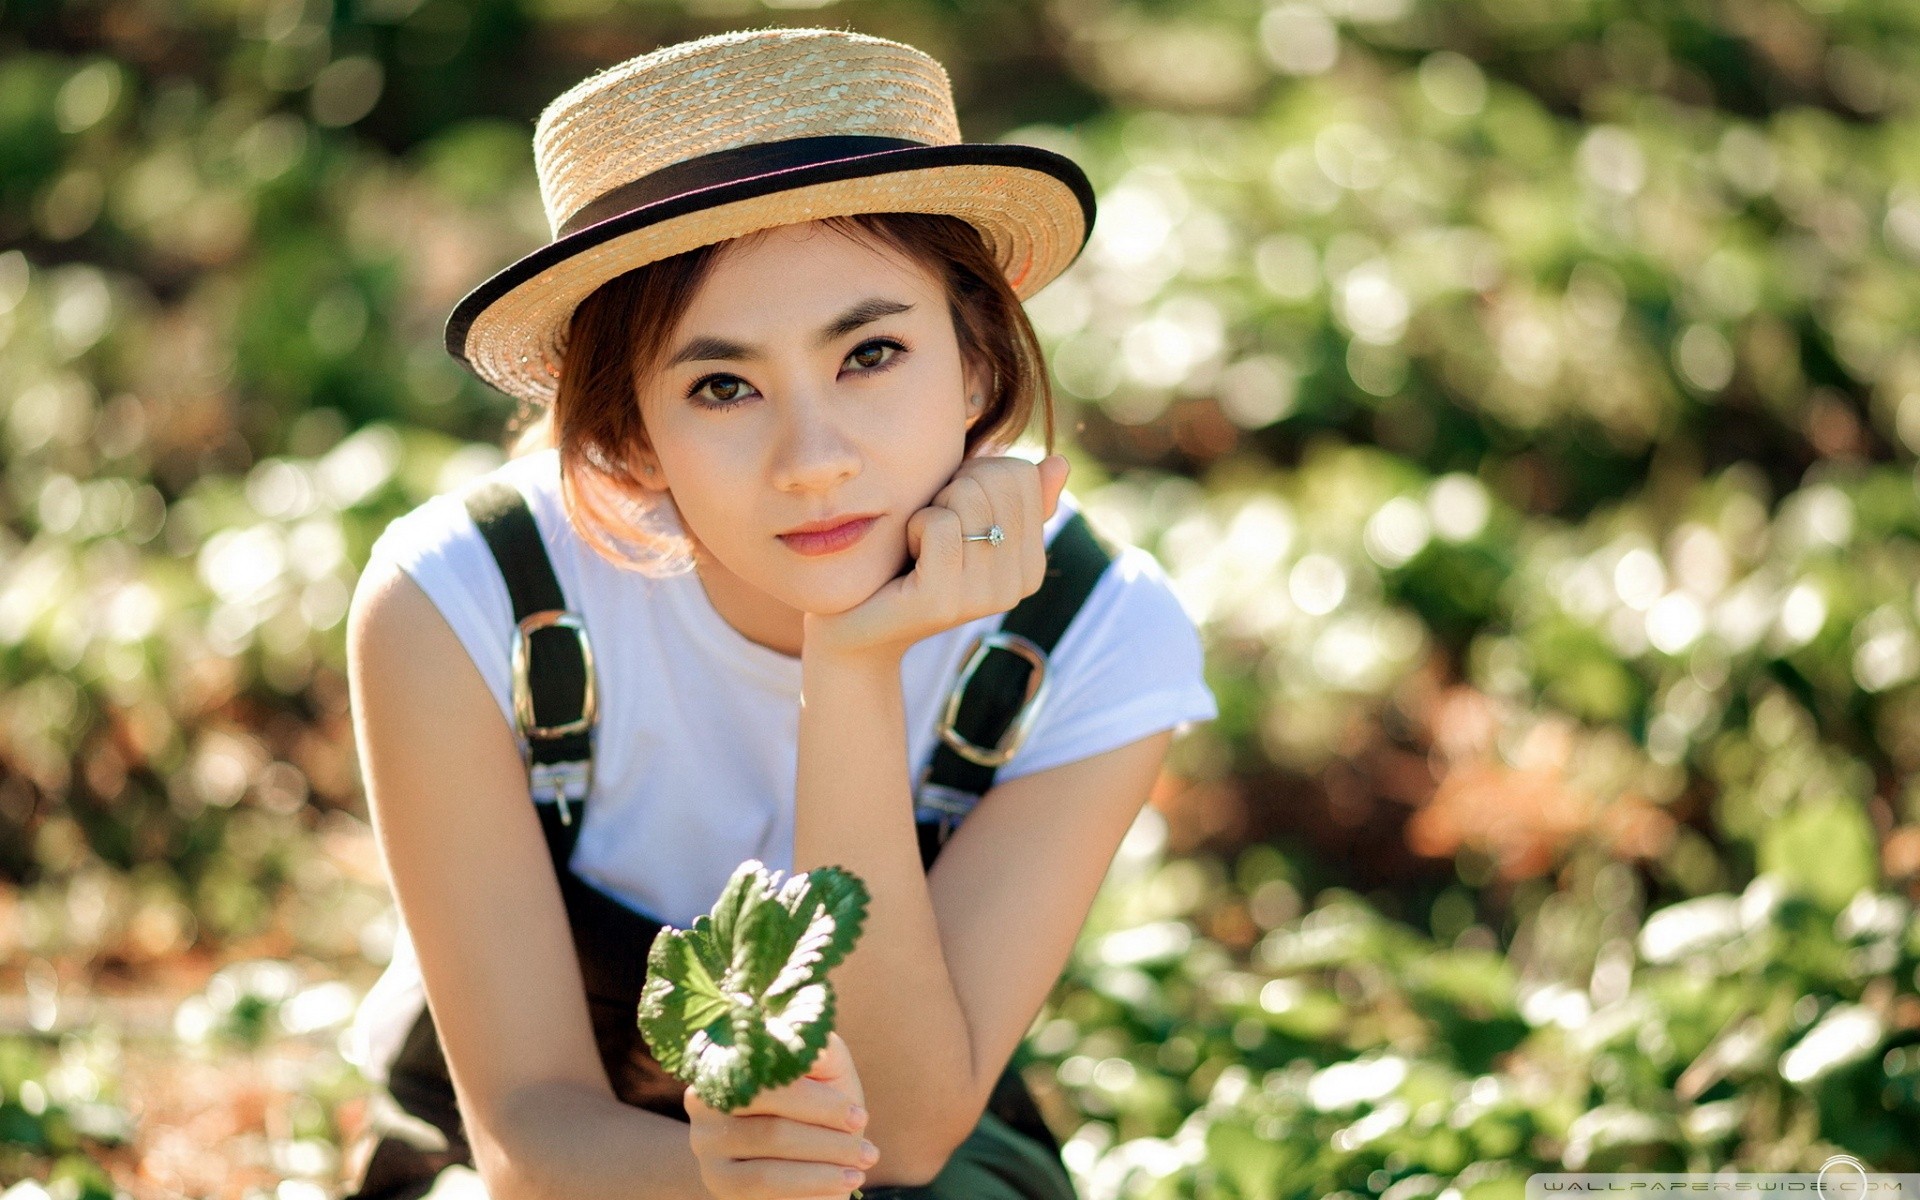 Women Asian Women With Hats Straw Hat Overalls Brunette Portrait Looking At Viewer 1920x1200